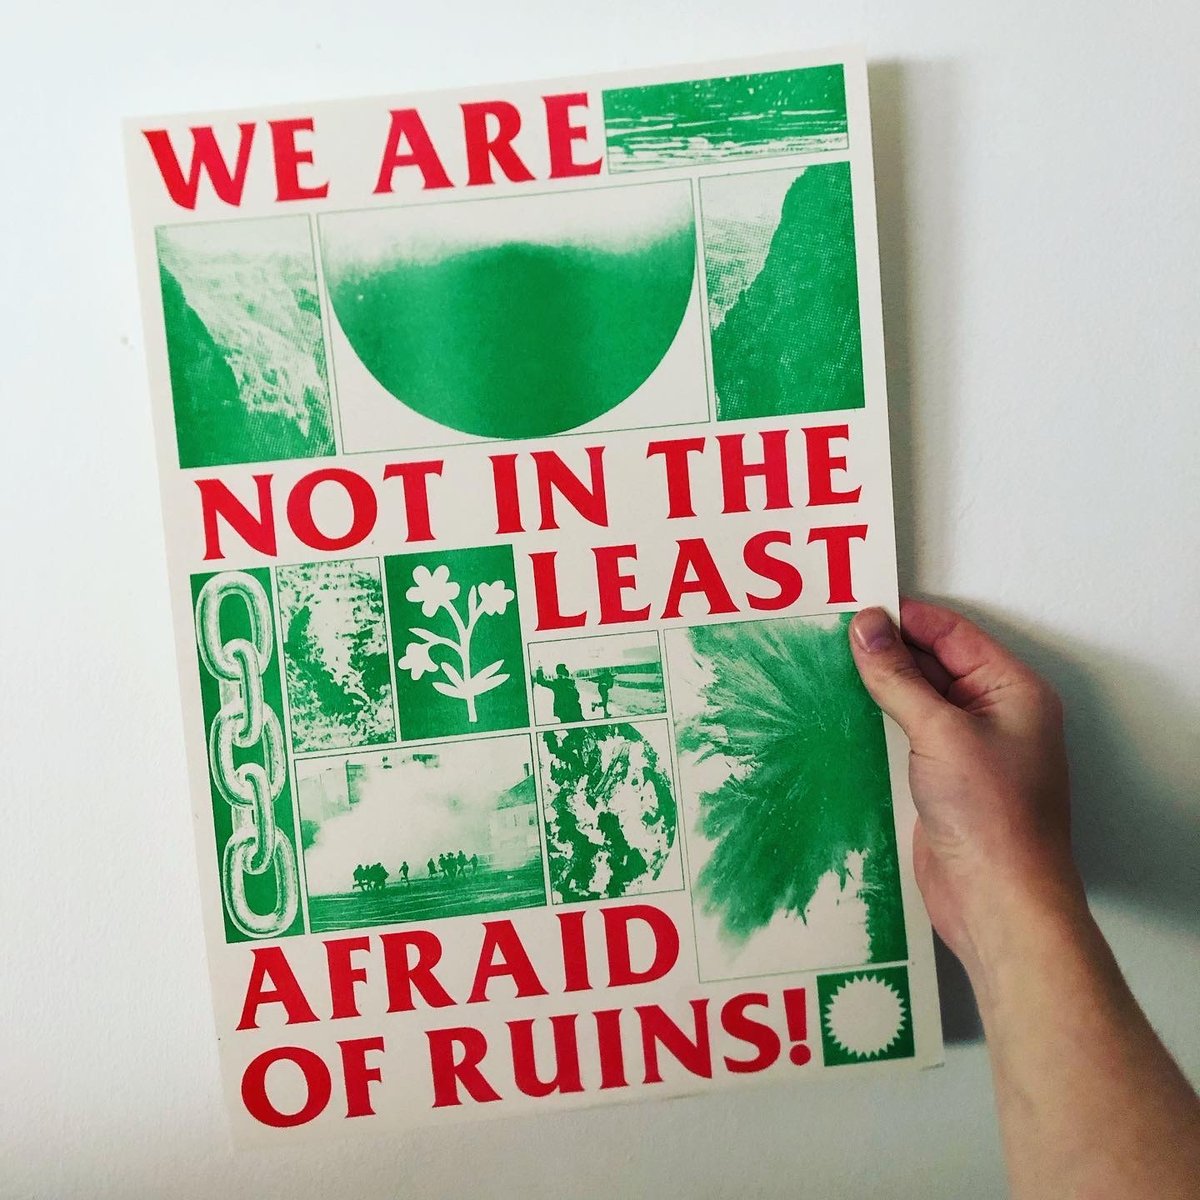 Image of we are not in the least afraid of ruins! a3 print